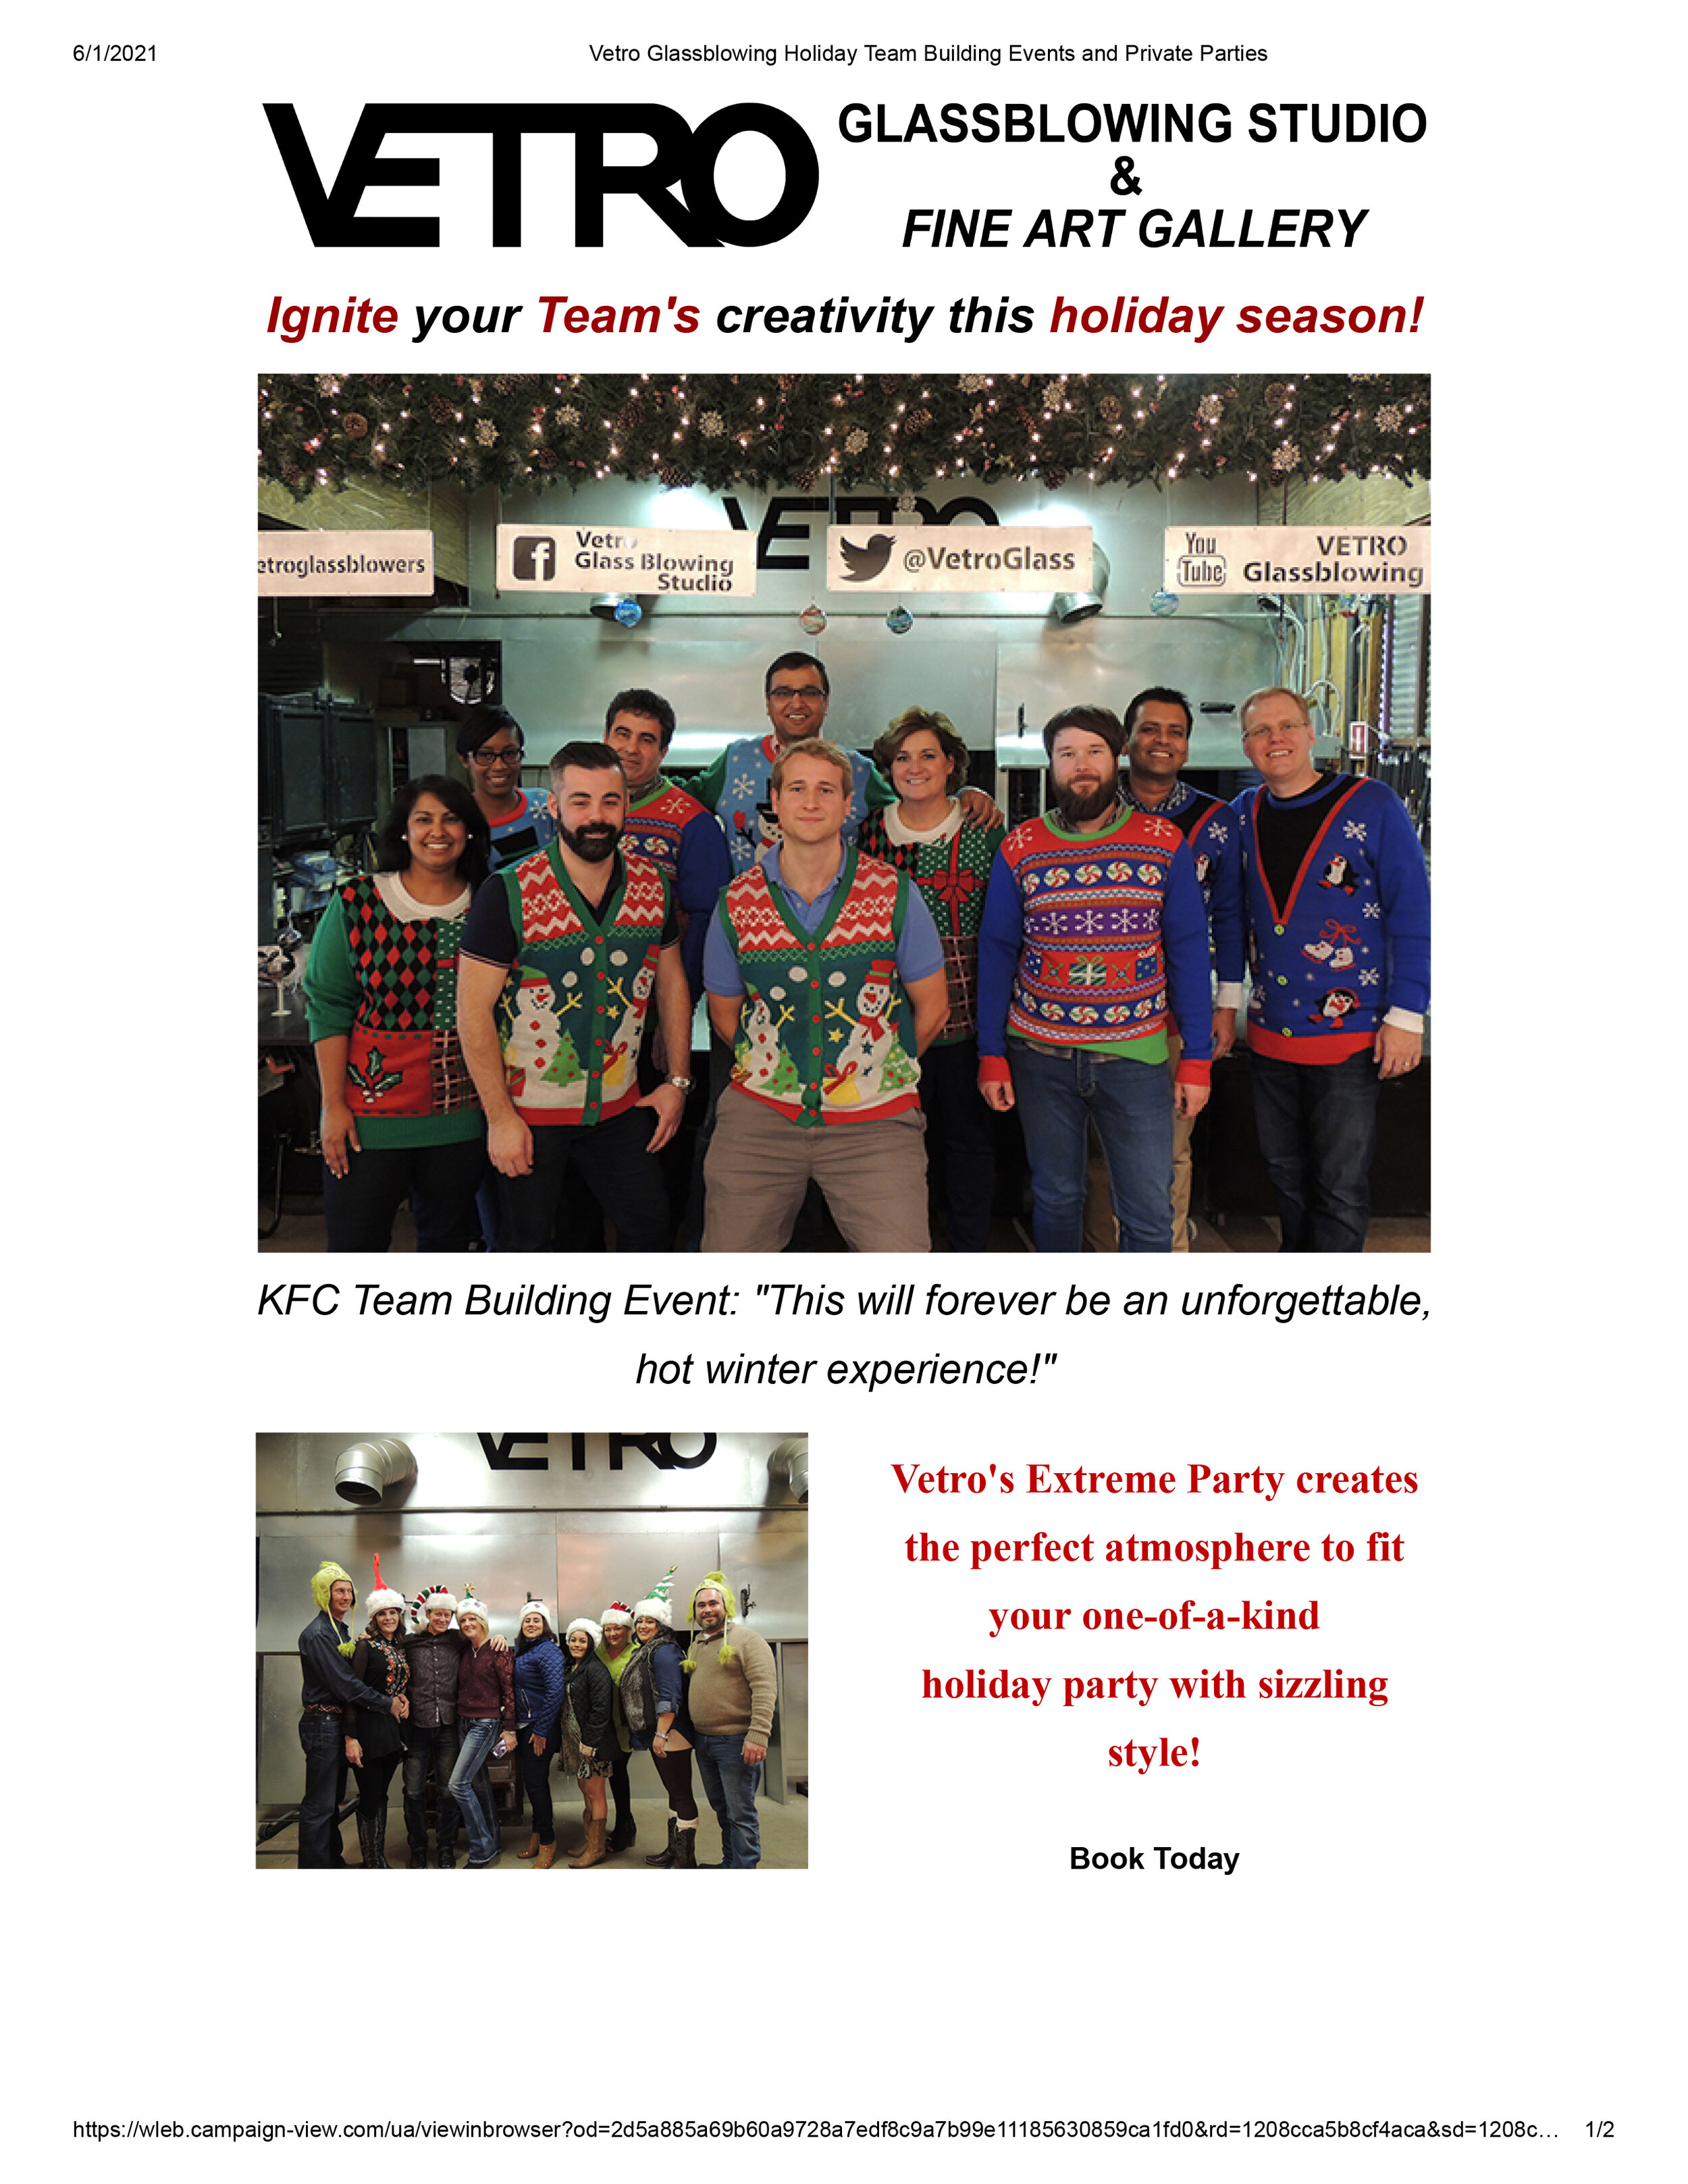 Email Campaigns -Vetro Glassblowing Studio -Ignite your Teams creativity this holiday season-1.jpg